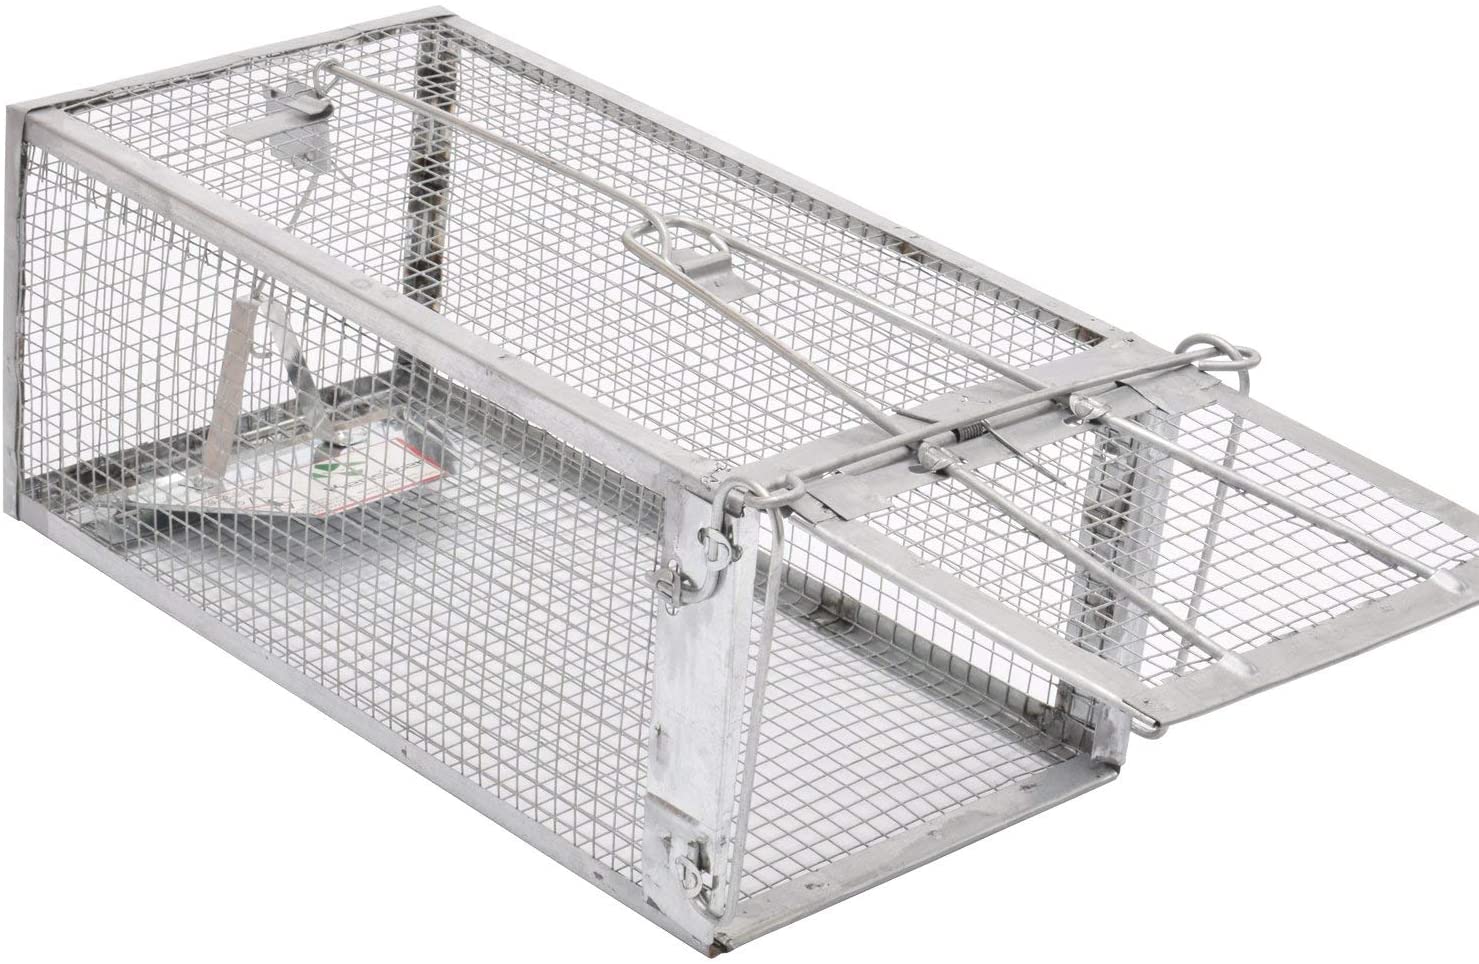 The Kensizer Animal Humane Live Cage Trap